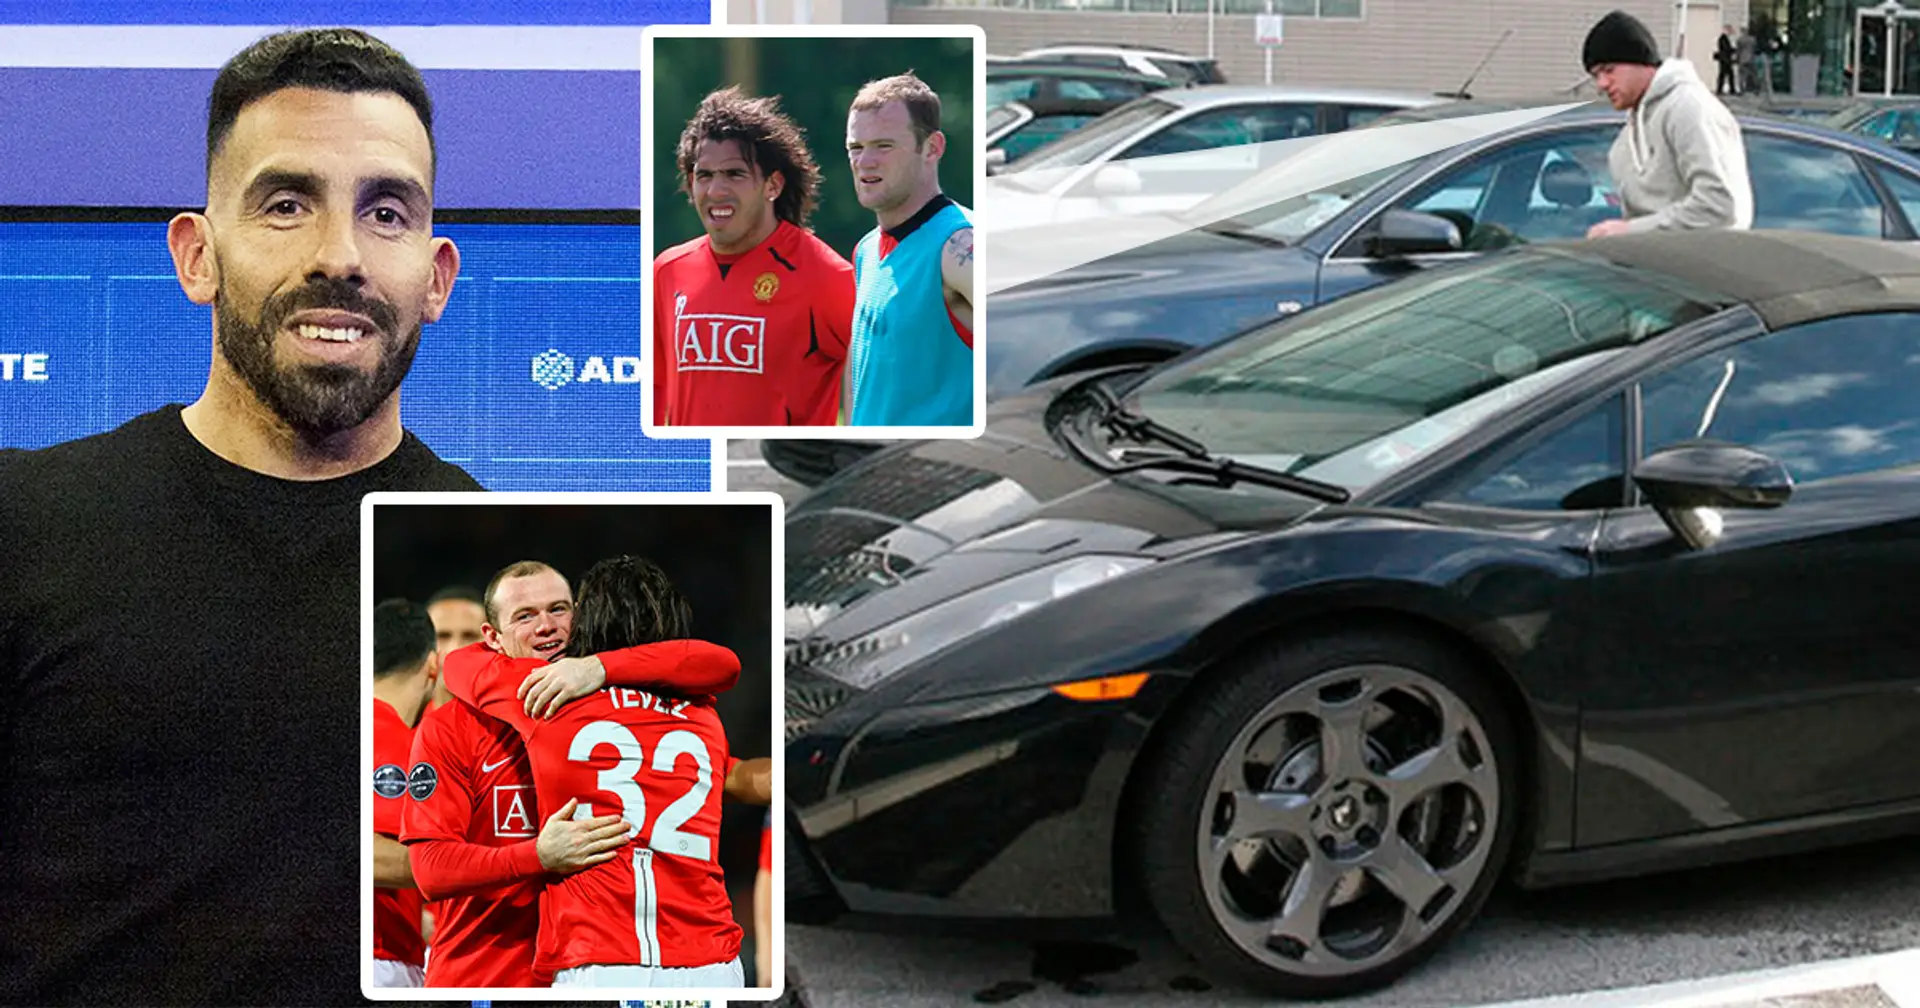 Tevez says Rooney gave him his own Lamborghini when United teammates trolled him about driving an Audi